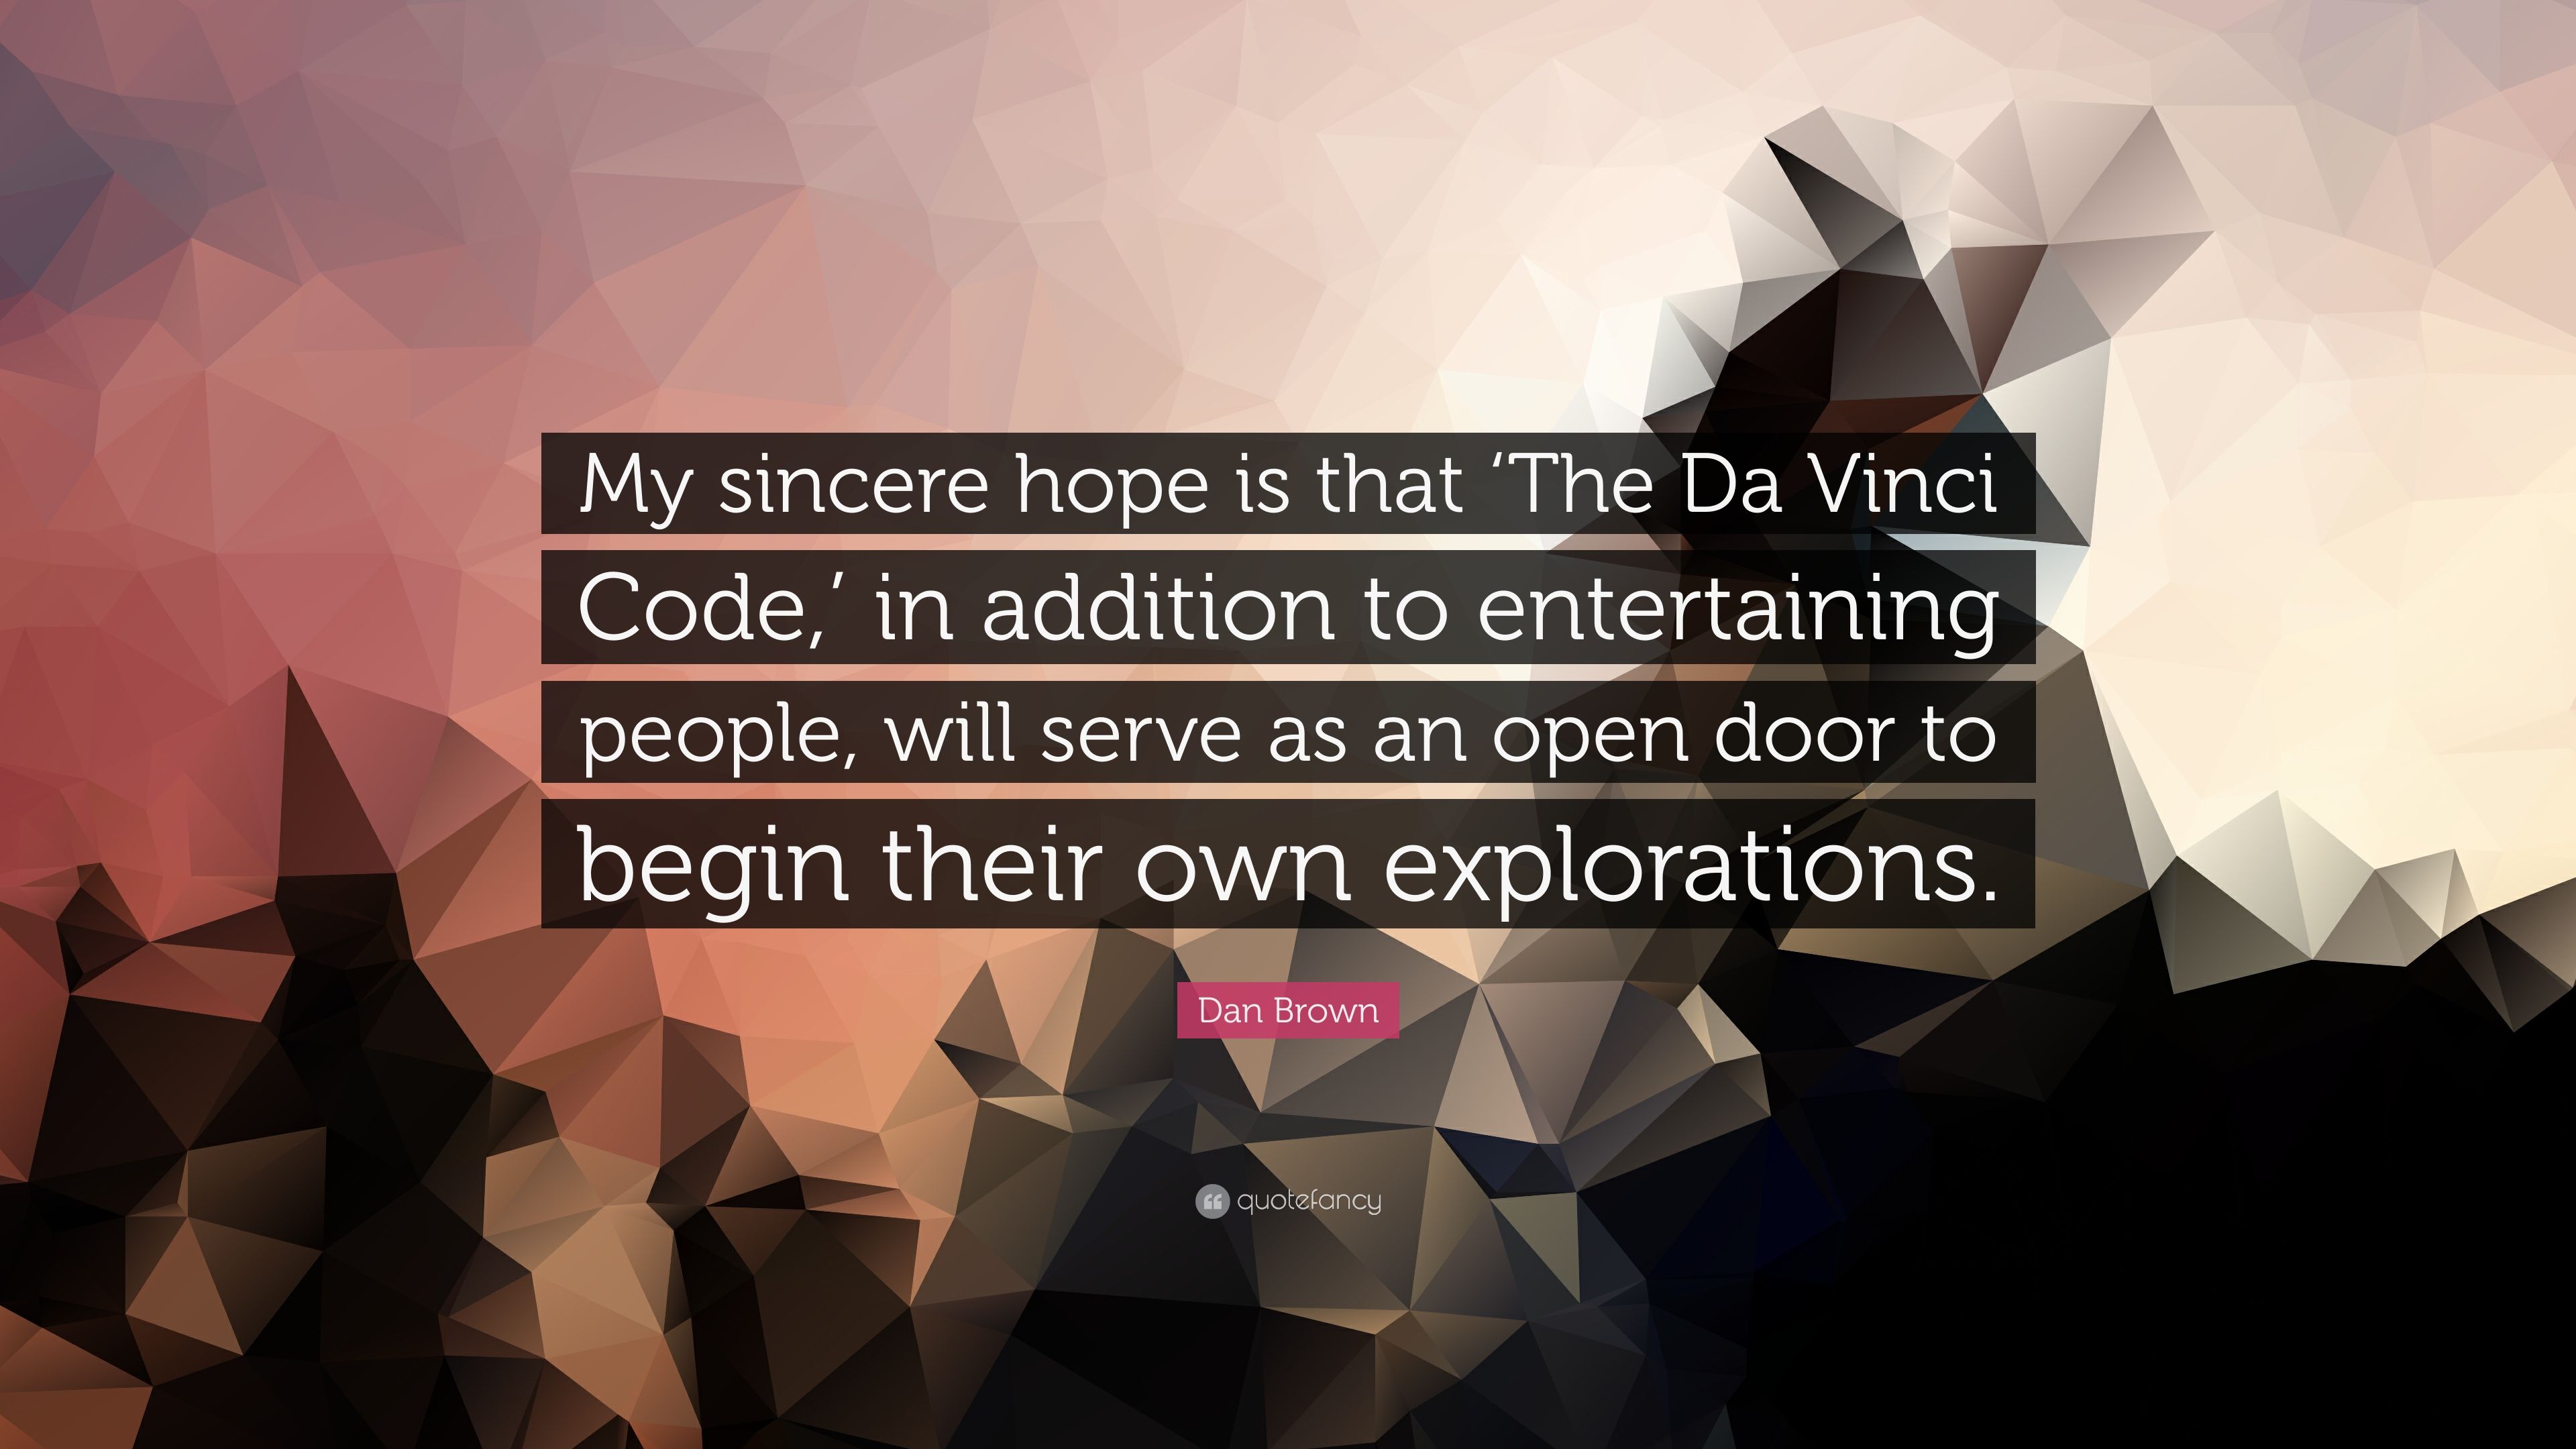 Dan Brown Quote: “My sincere hope is that 'The Da Vinci Code, ' in addition to entertaining people, will serve as an open door to begin the.” (7 wallpaper)